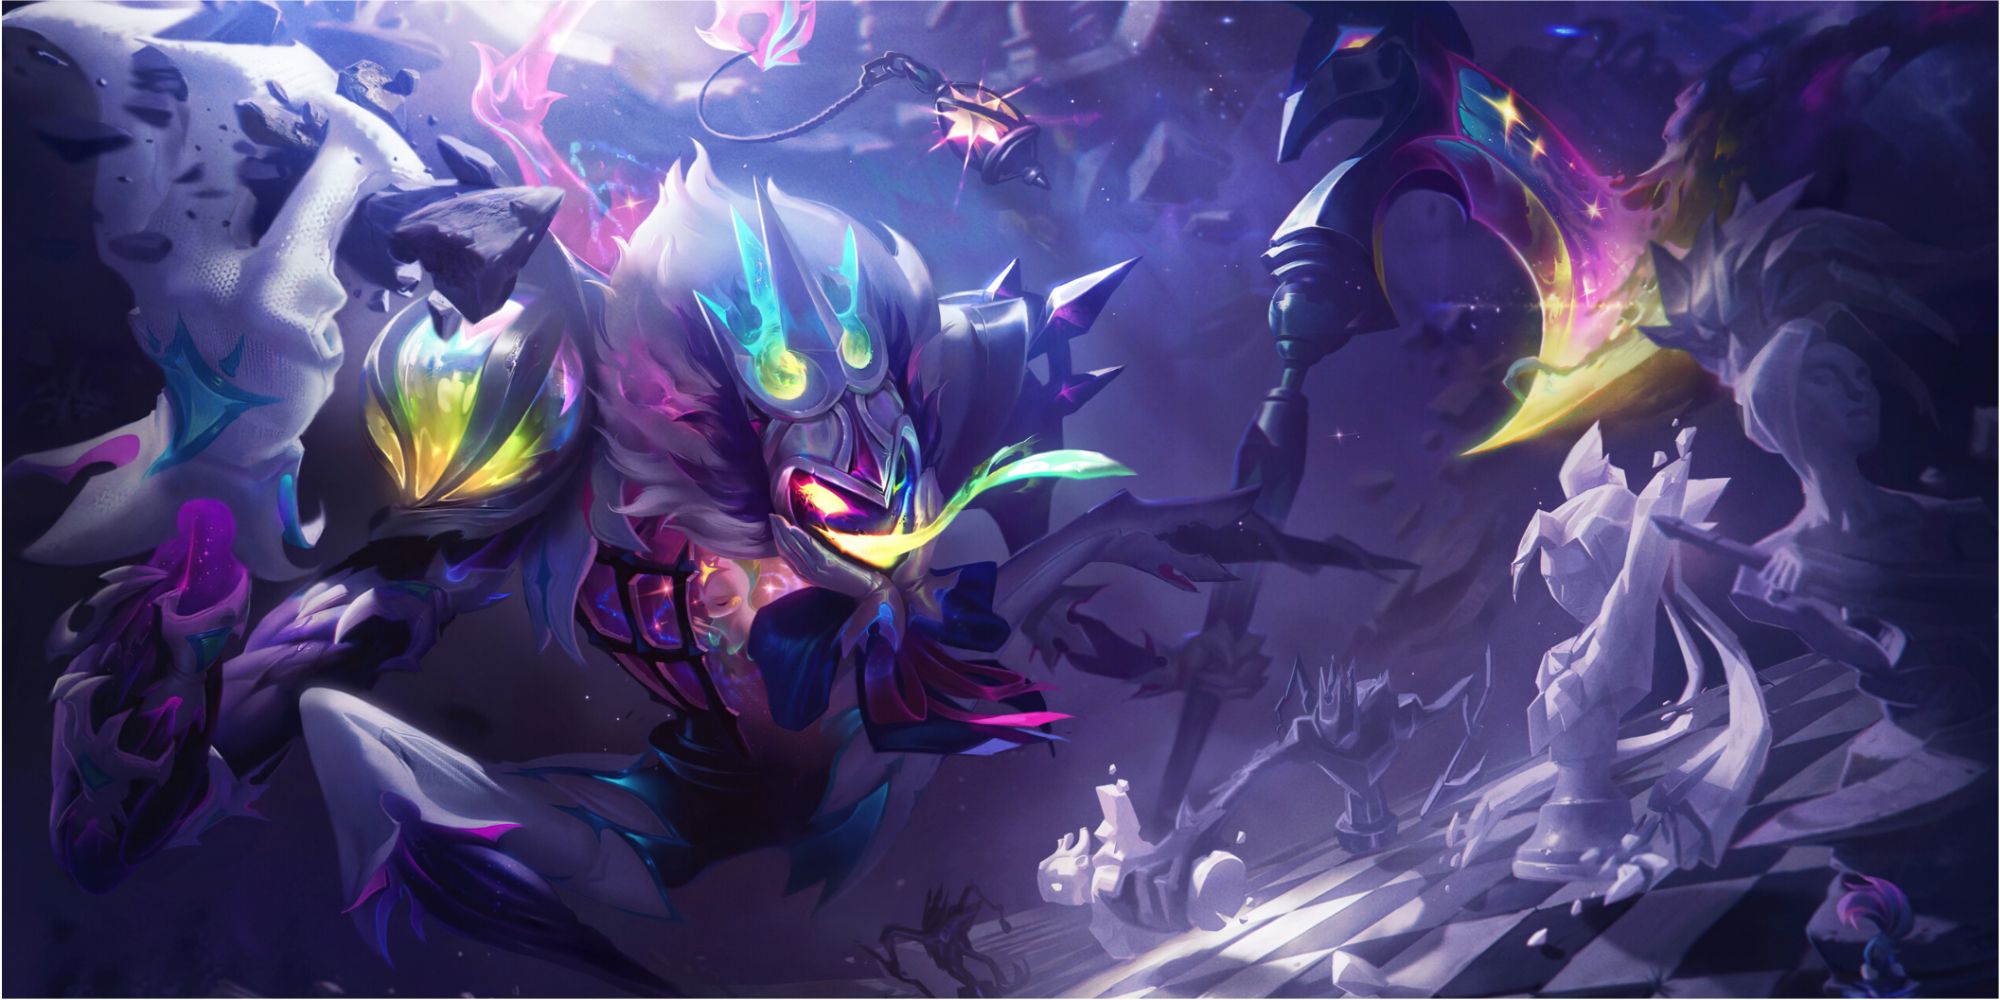 Star Nemesis Fiddlesticks tormenting Star Guardian Akali, its colors the only ones against the black and white chess